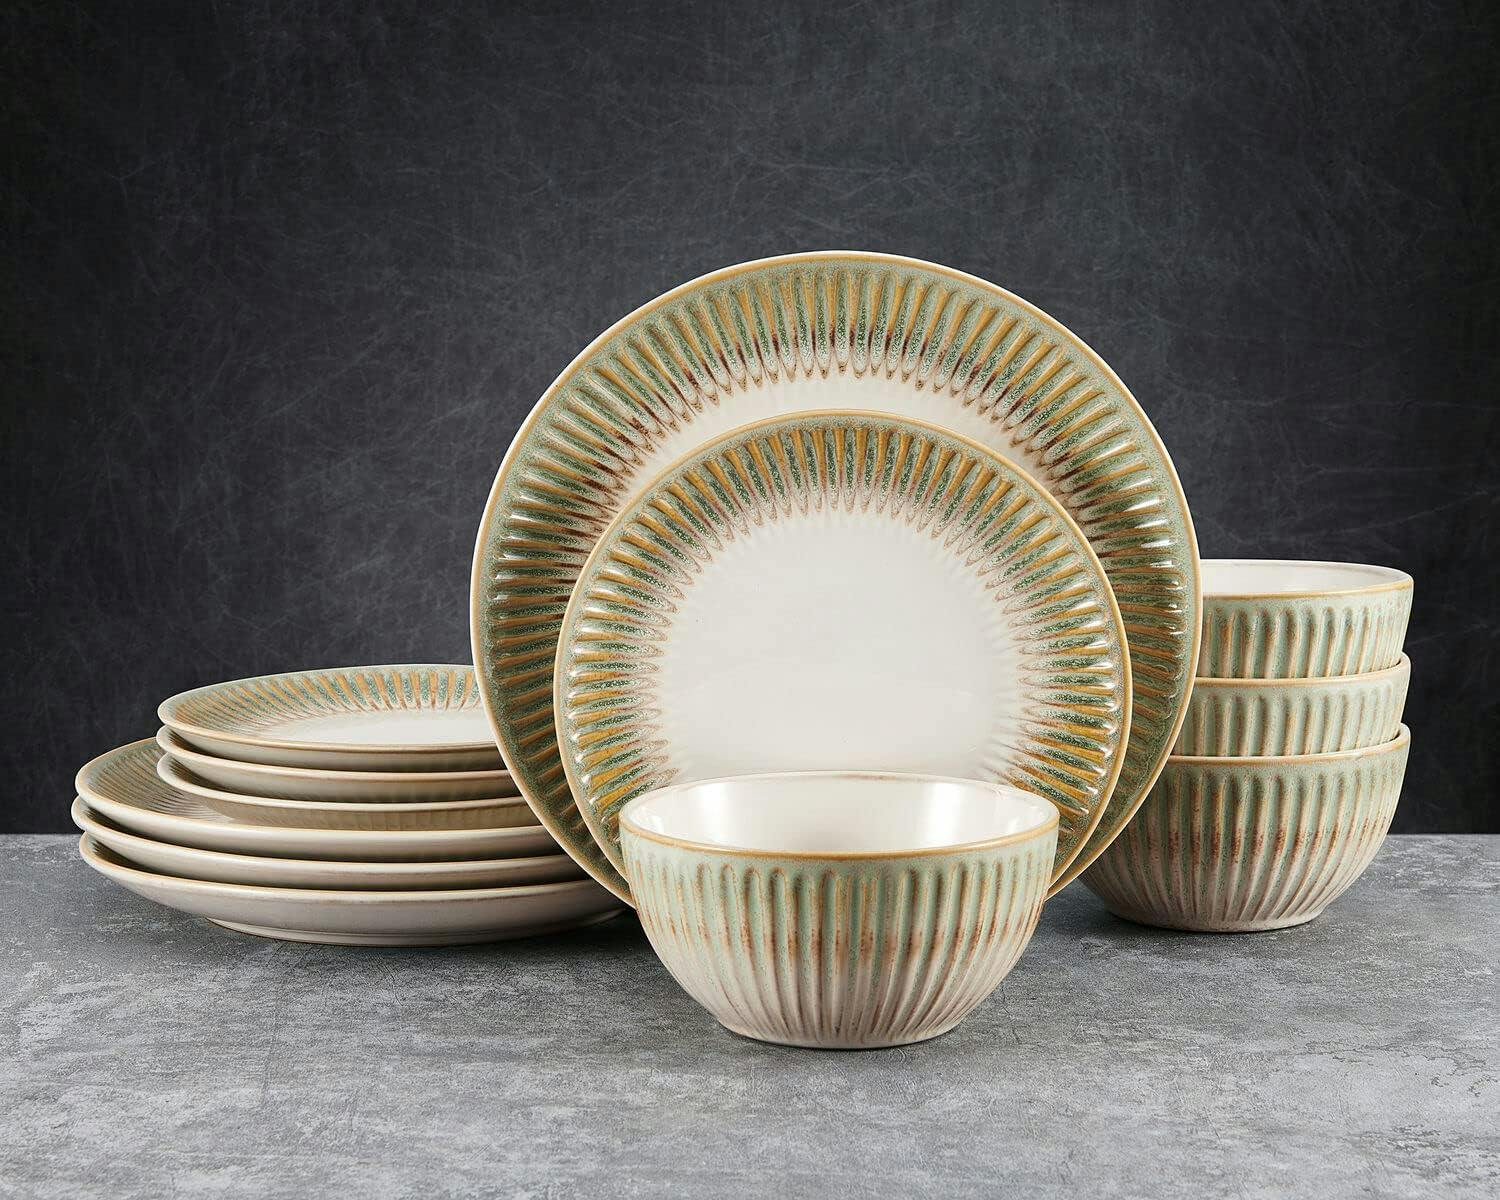 Hensley Green and White 12-Piece Stoneware Dinnerware Set for 4